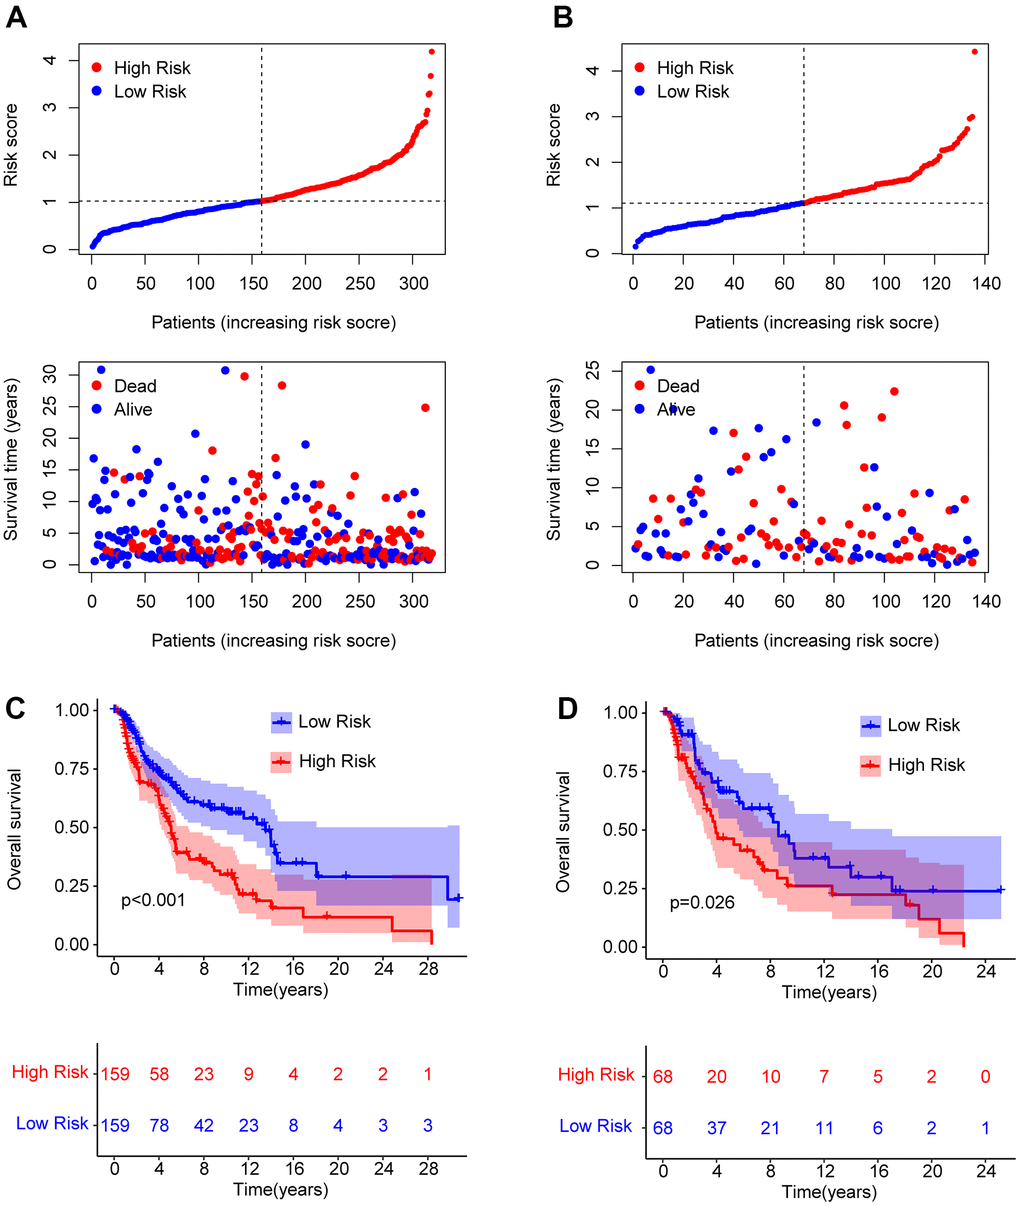 Risk model construction in the training cohort and test cohort based on the prognostic ARLs. The classification of the CM patients and the scatter dot plot demonstrates the correlation between the risk score and survival time of CM patients in training cohort (A) and test cohort (B). (C, D) The Kaplan-Meier survival curve shows the OS rate of patients in the training cohort and test cohort.